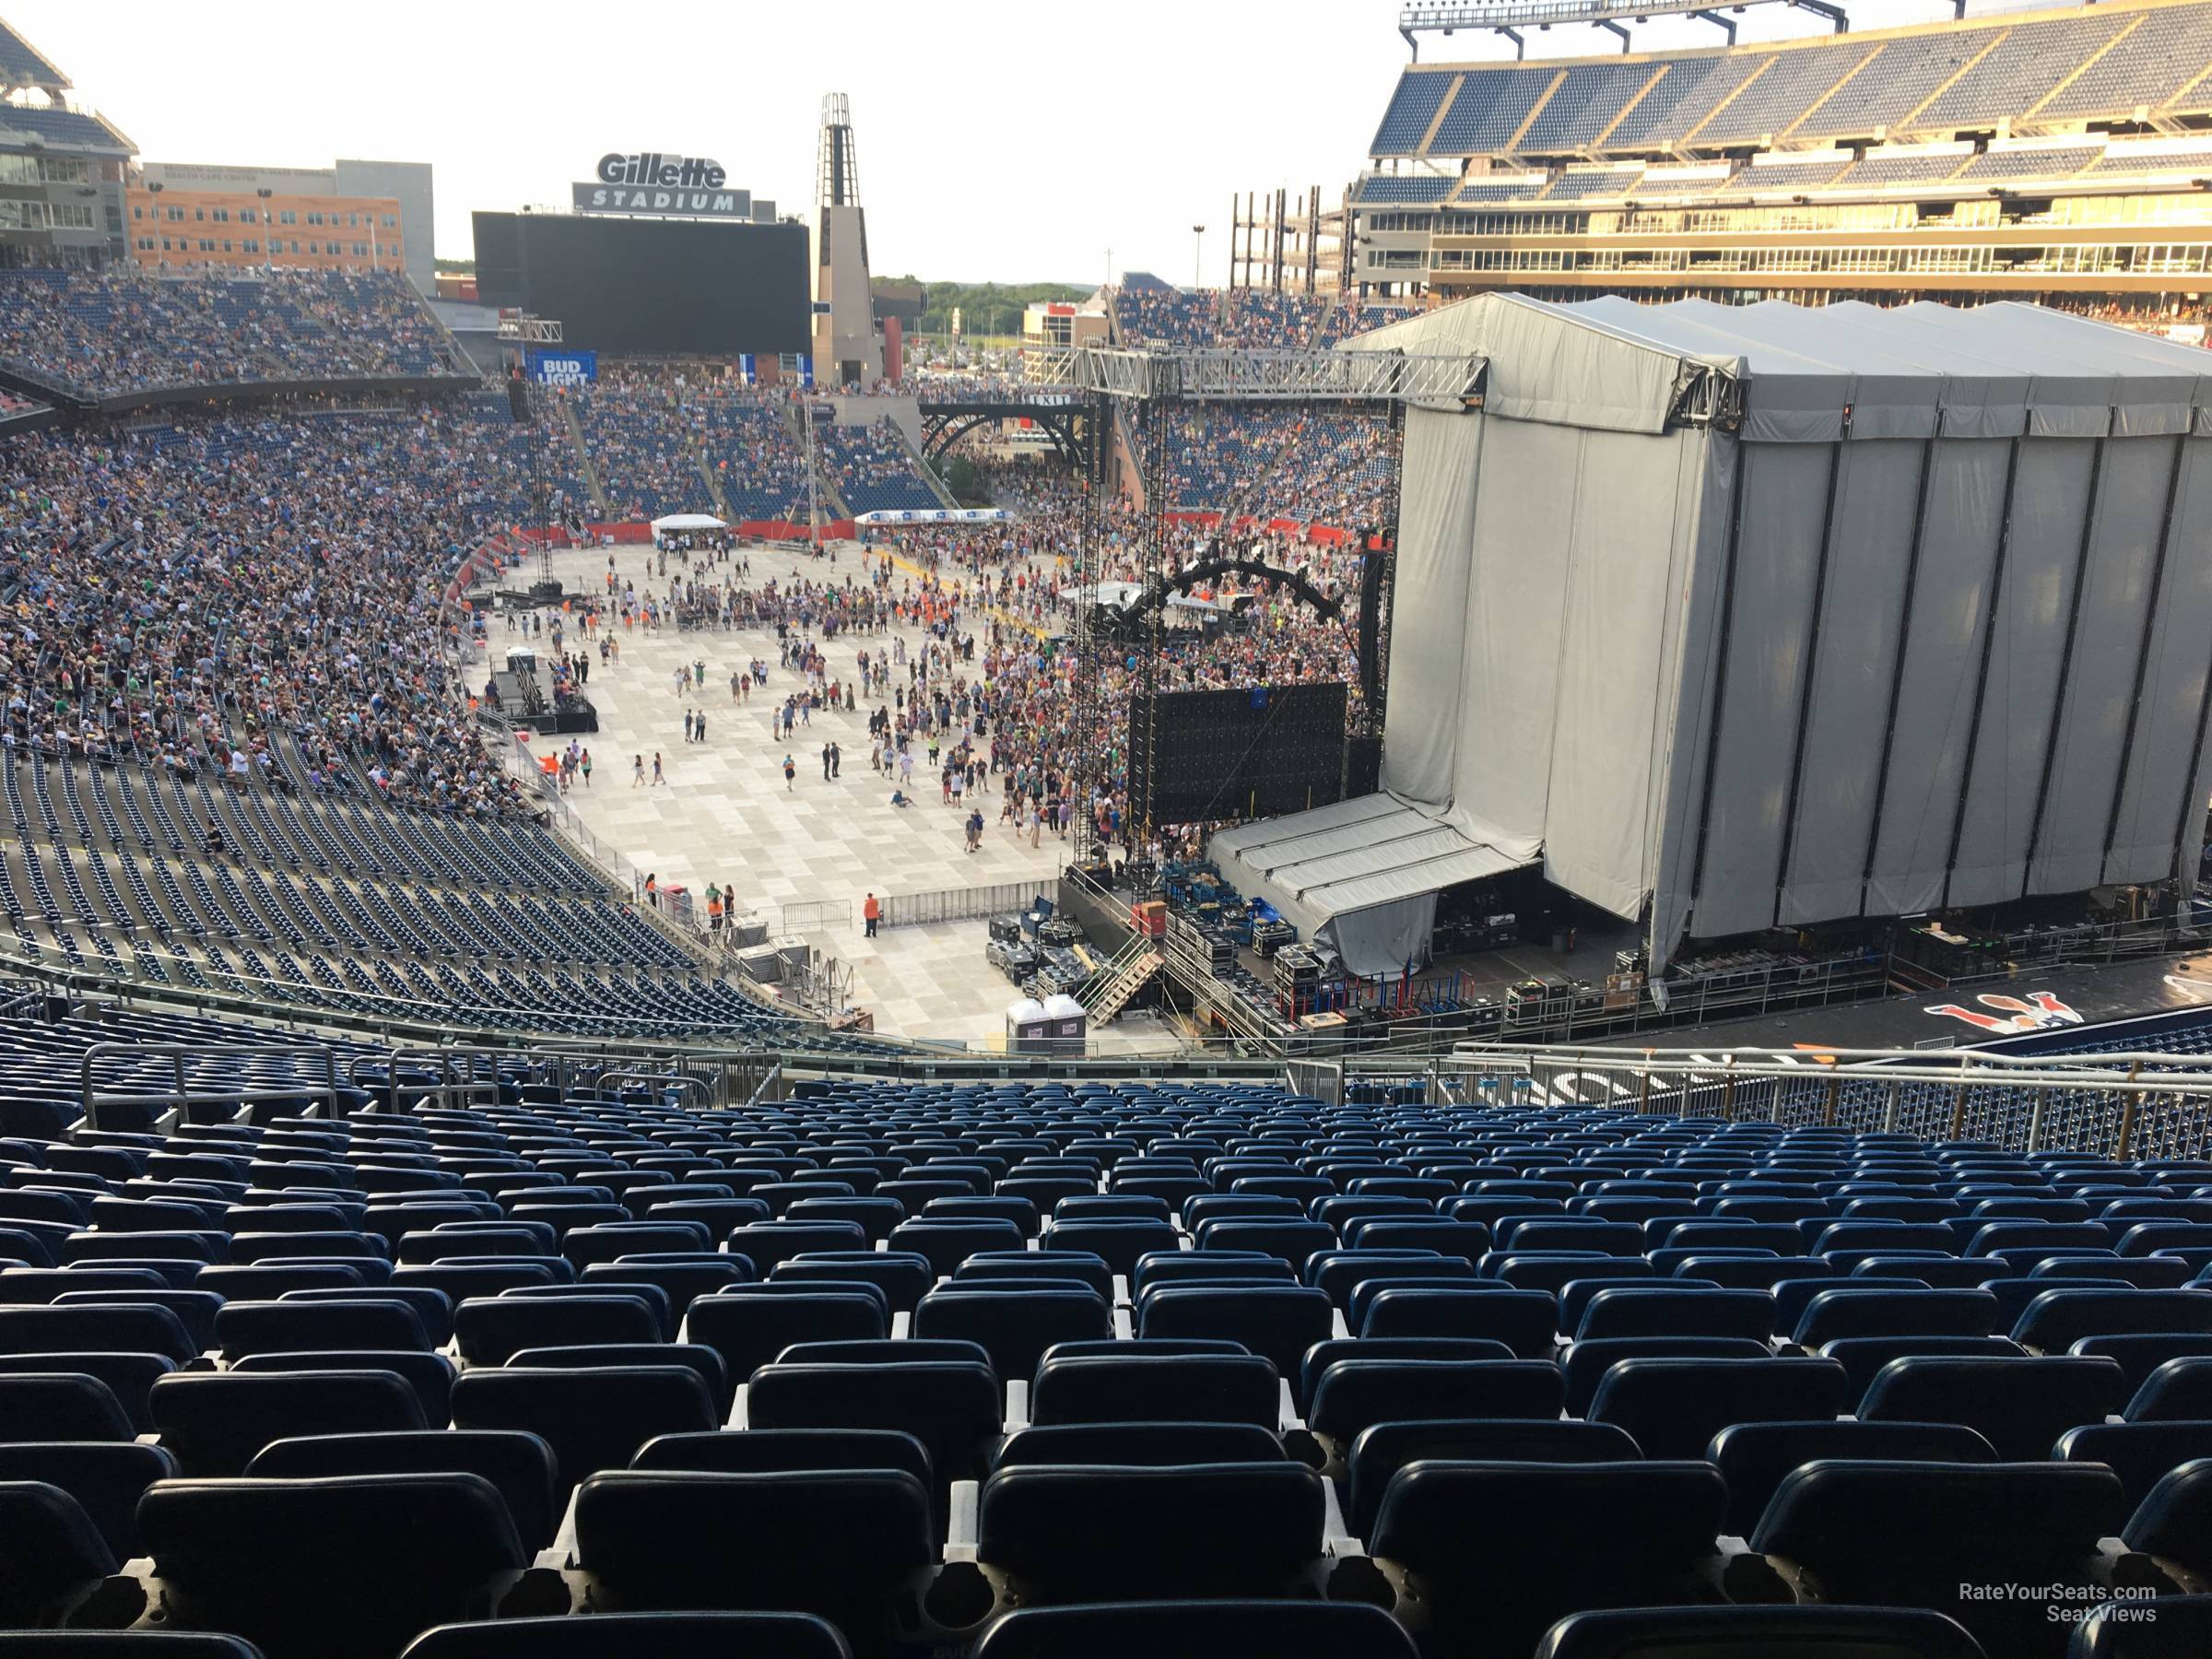 section 223, row 27 seat view  for concert - gillette stadium